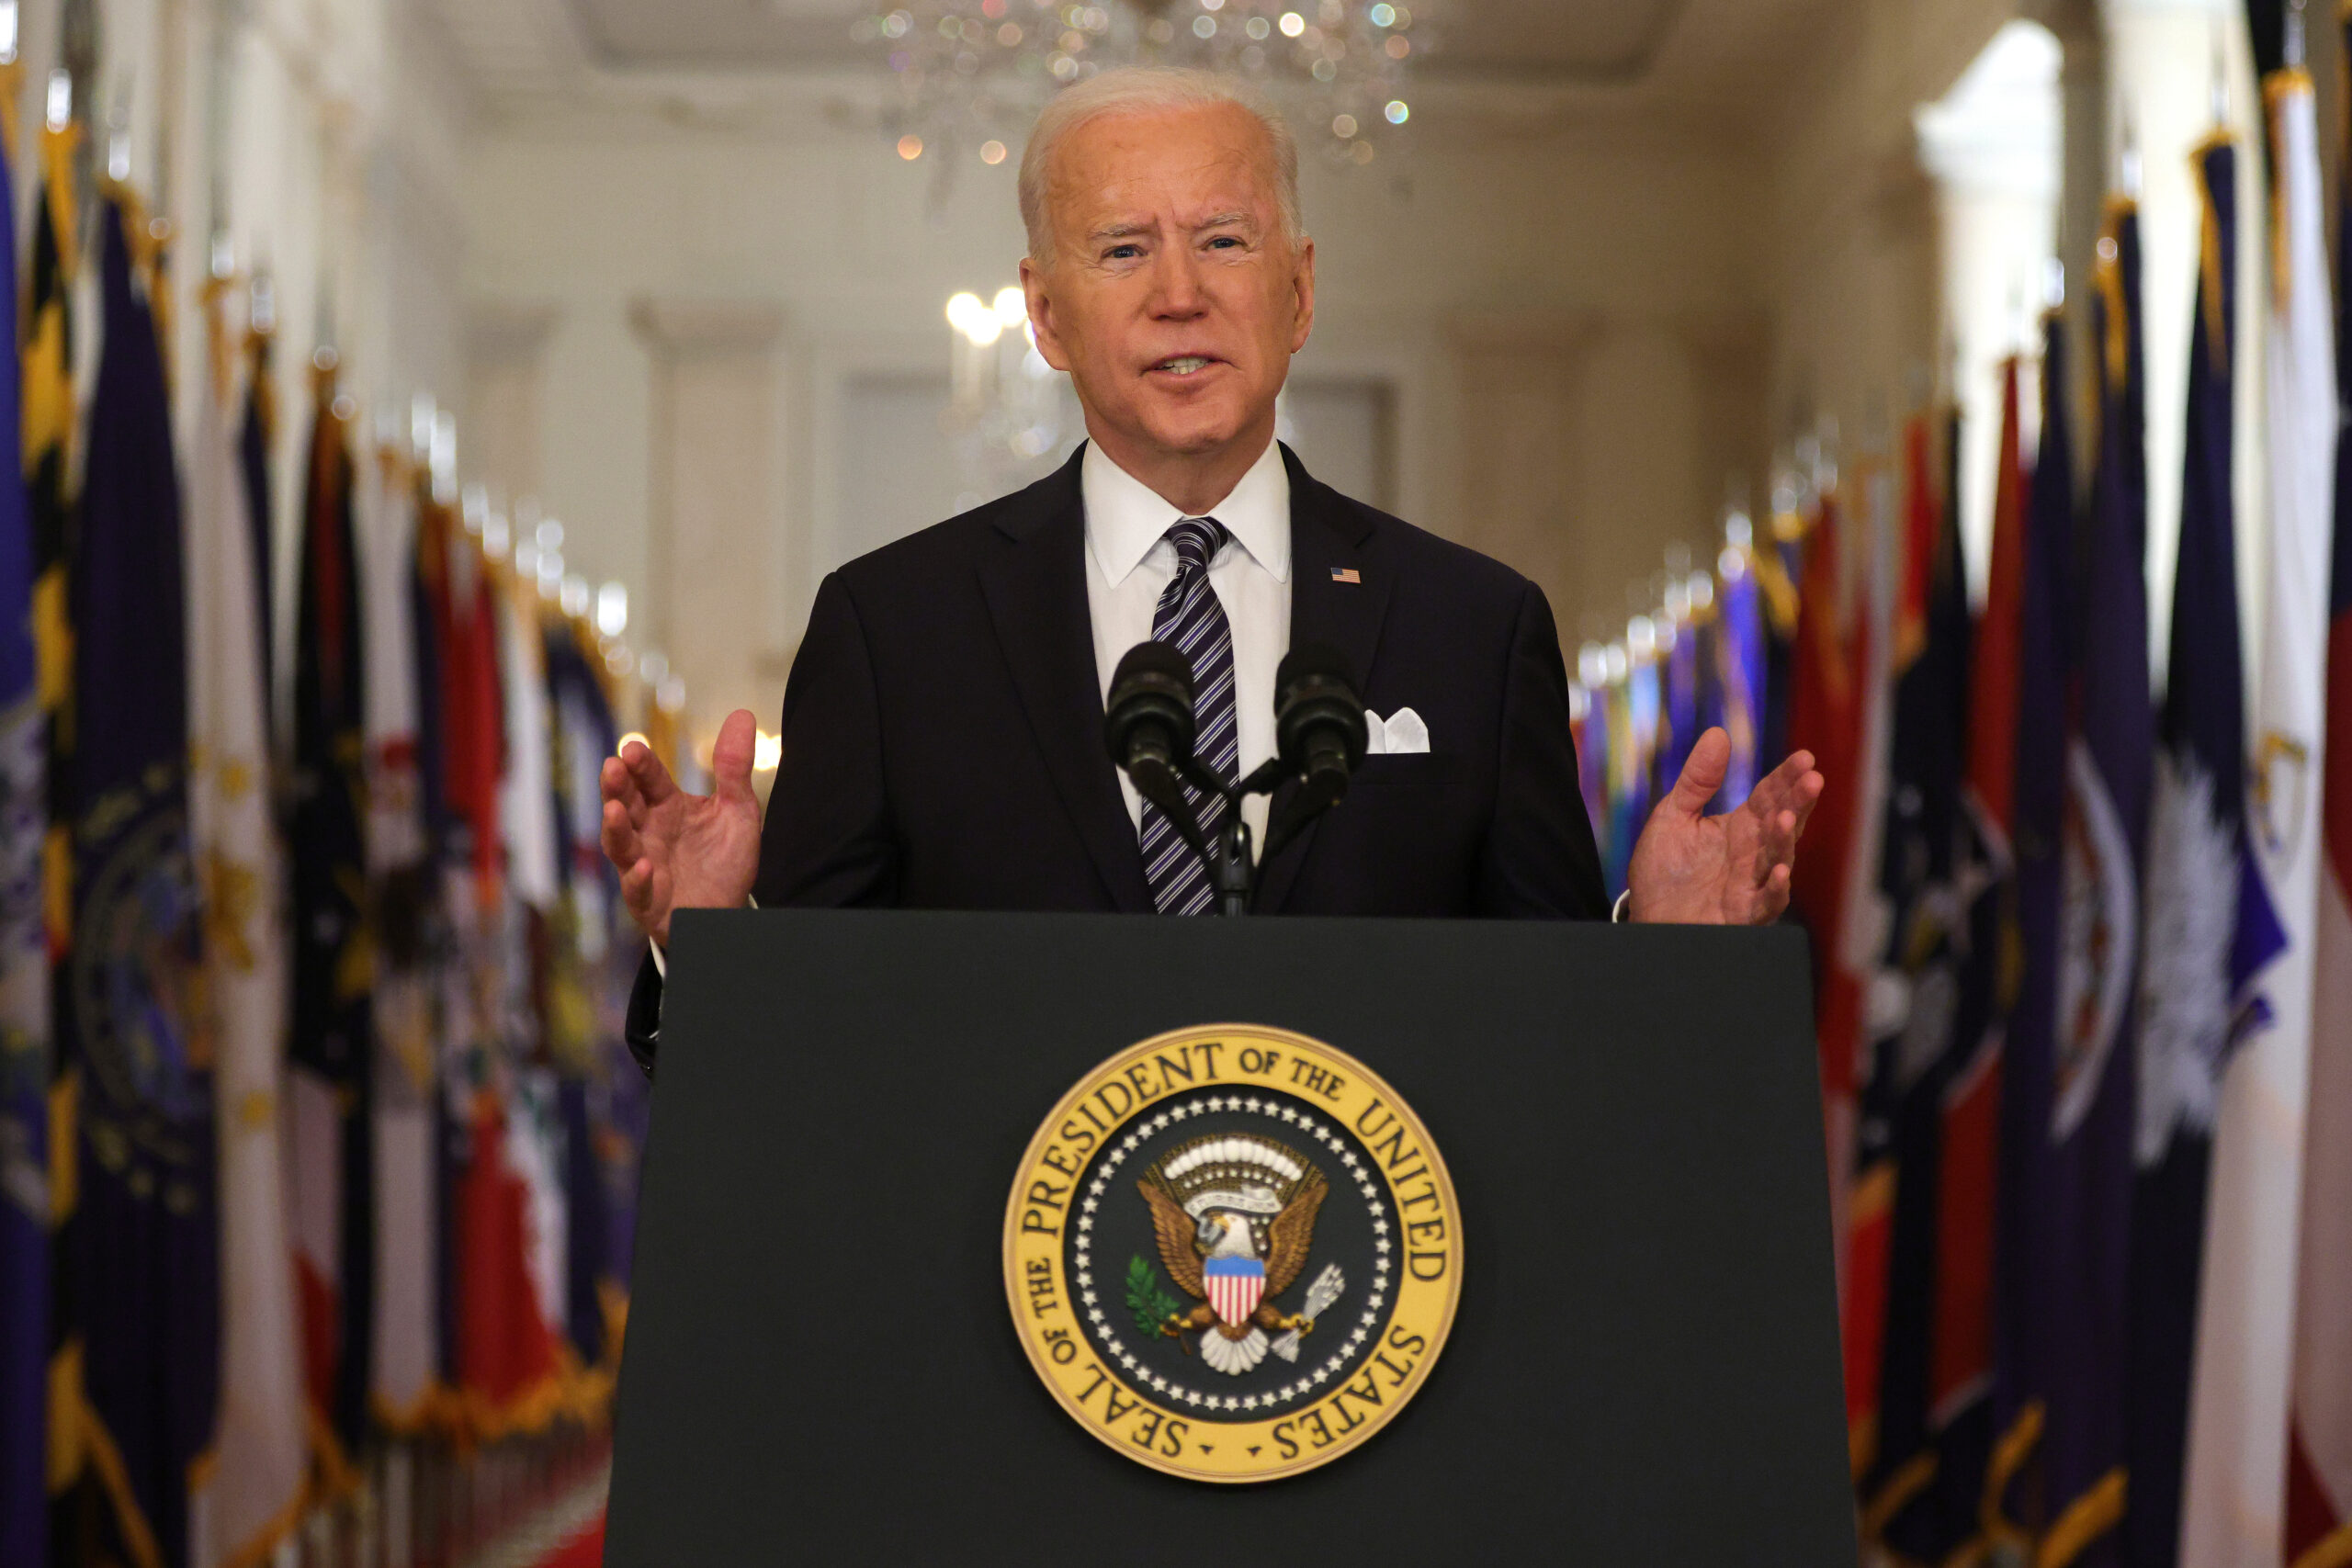 WASHINGTON, DC - MARCH 11: U.S. President Joe Biden speaks as he gives a primetime address to the nation from the East Room of the White House March 11, 2021 in Washington, DC. President Biden gave the address to mark the one-year anniversary of the shutdown due to the COVID-19 pandemic. (Photo by Alex Wong/Getty Images)